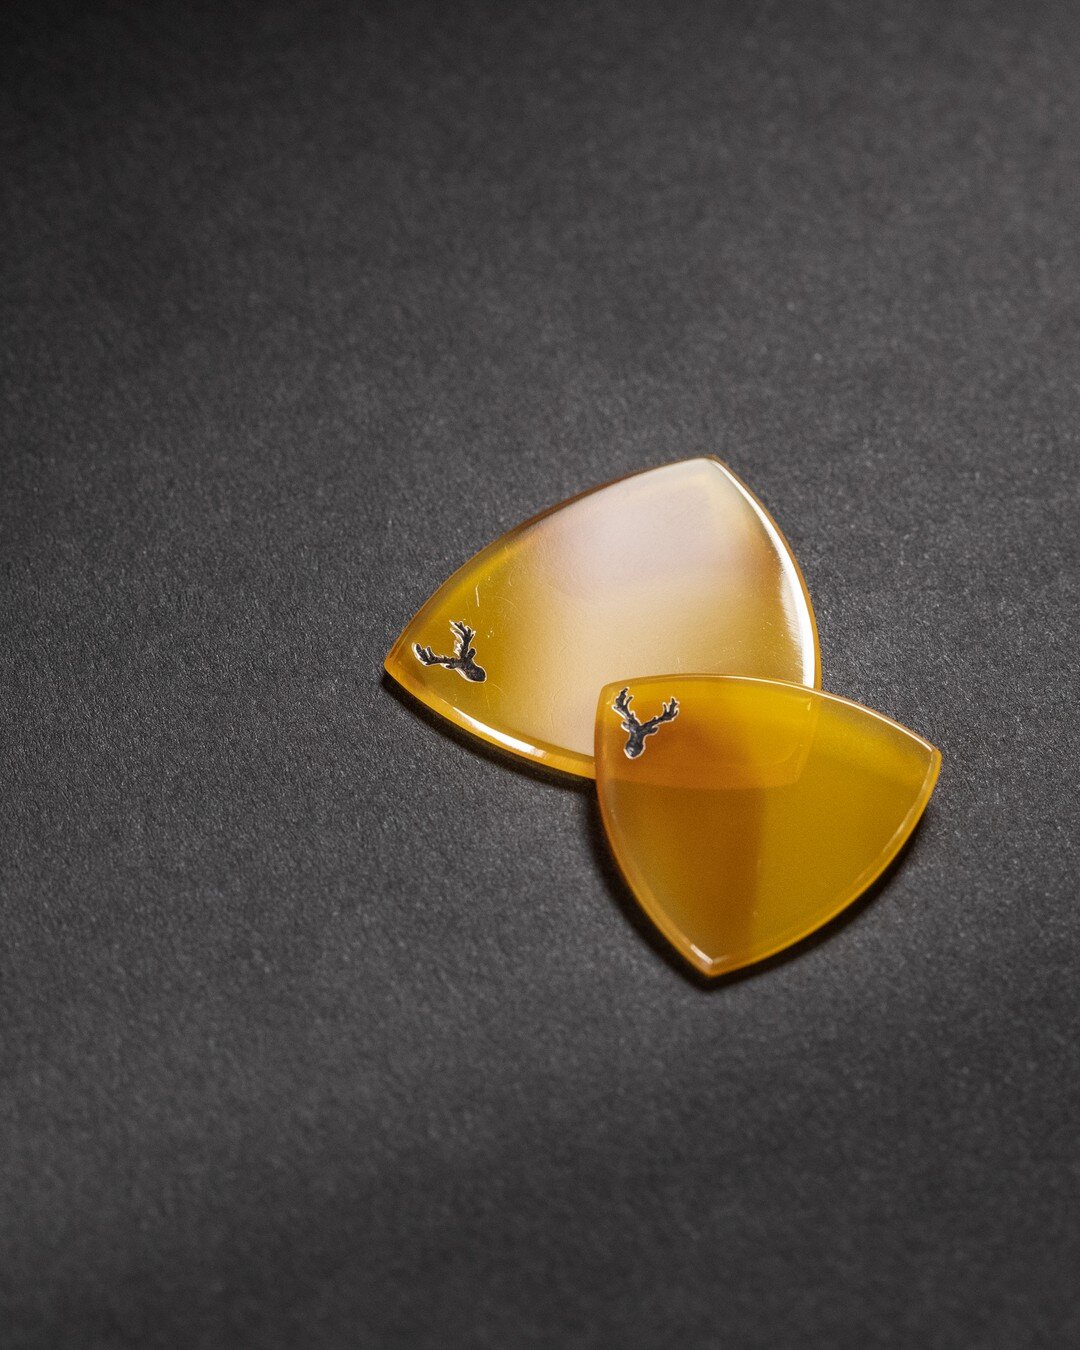 Twins. well, close enough.⁠
For the exact sizes of these picks, click on the product links.⁠
&bull;⁠
Tone. Feel. APC.⁠
#Handcrafted #AmericanPickCompany #APC #americanpicks #leather #guitarpick #guitar #pick #american #picks #guitarpicks #madeintheus